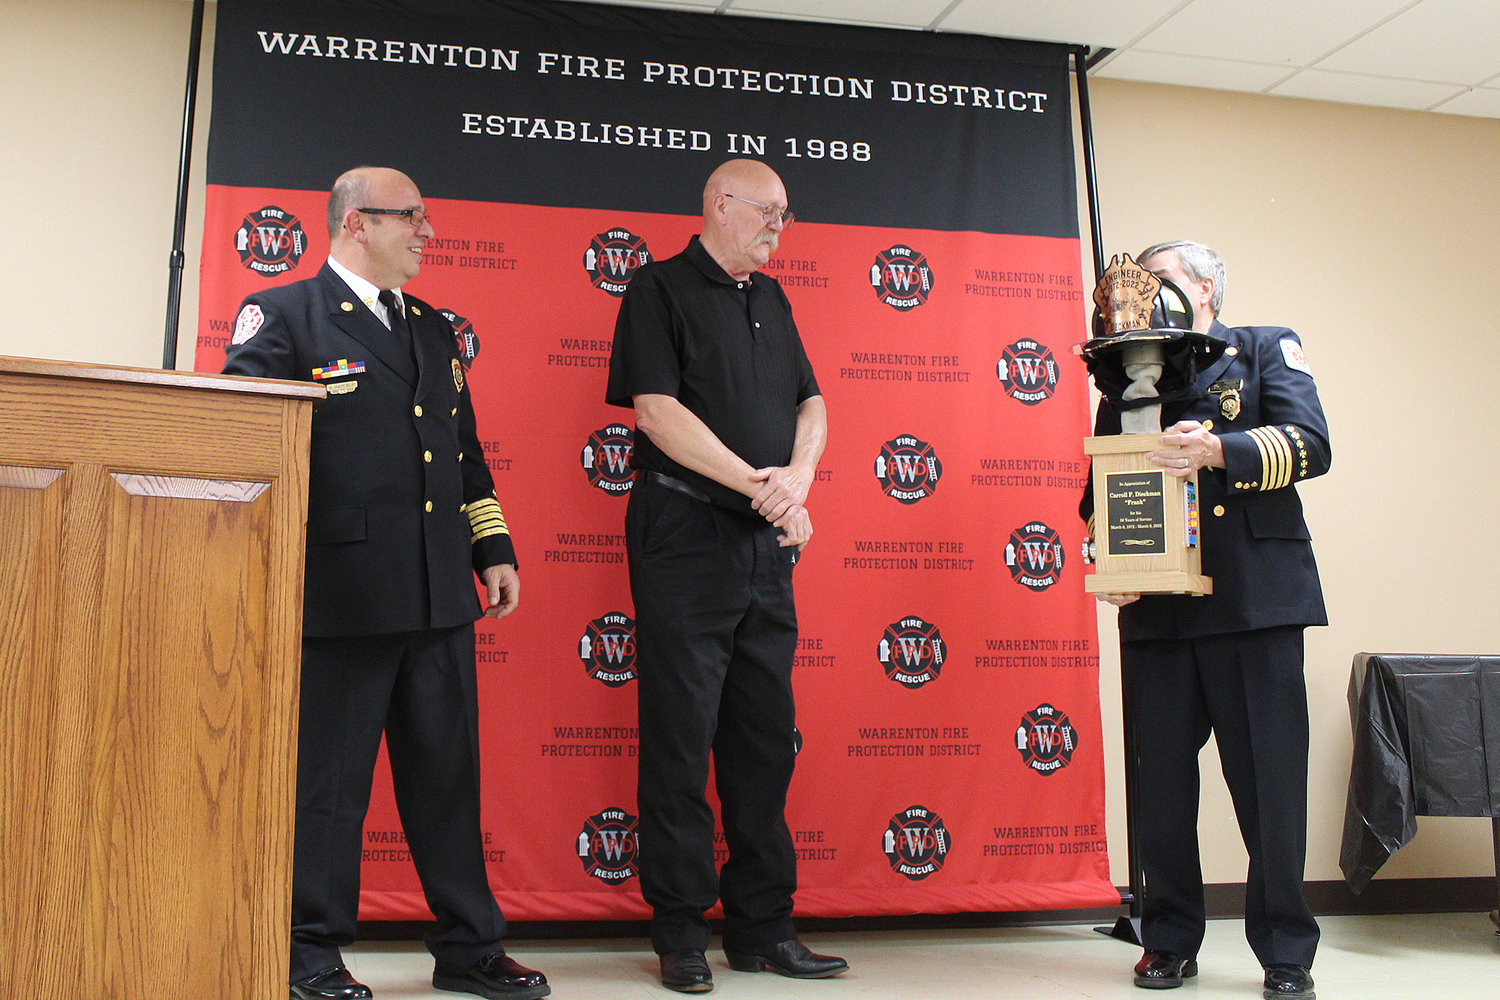 50-YEAR FIREFIGHTER – Volunteer firefighter Frank Dieckman, center, receives a custom-crafted award for 50 years of service with Warrenton Fire Protection District. Presenting the award are Chief Anthony Hayeslip and Assistant Chief Keith Smith.